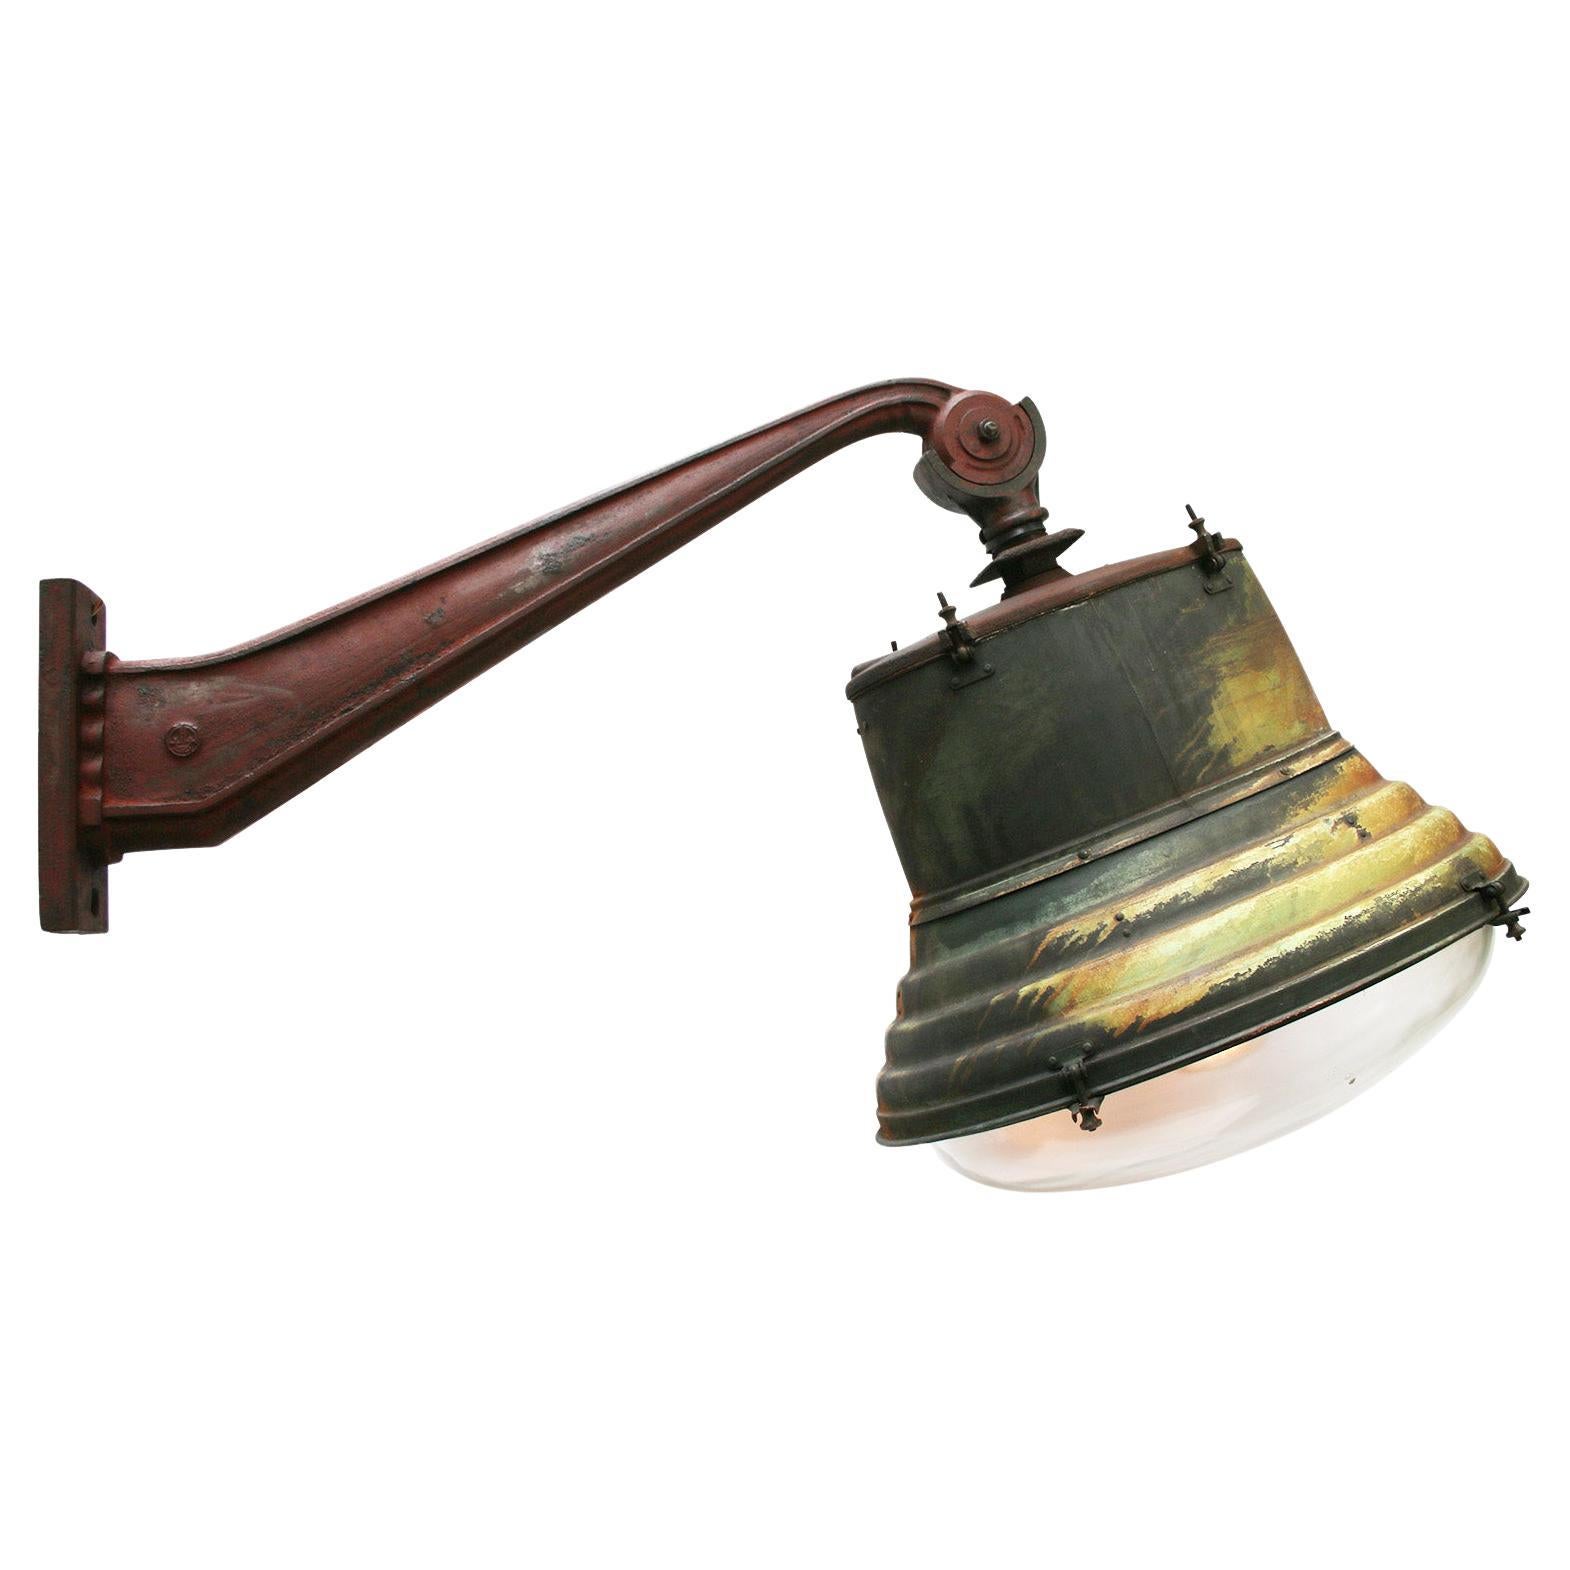 Extra Large Copper Iron Mercury Mirror Street Light by Eclatec, France